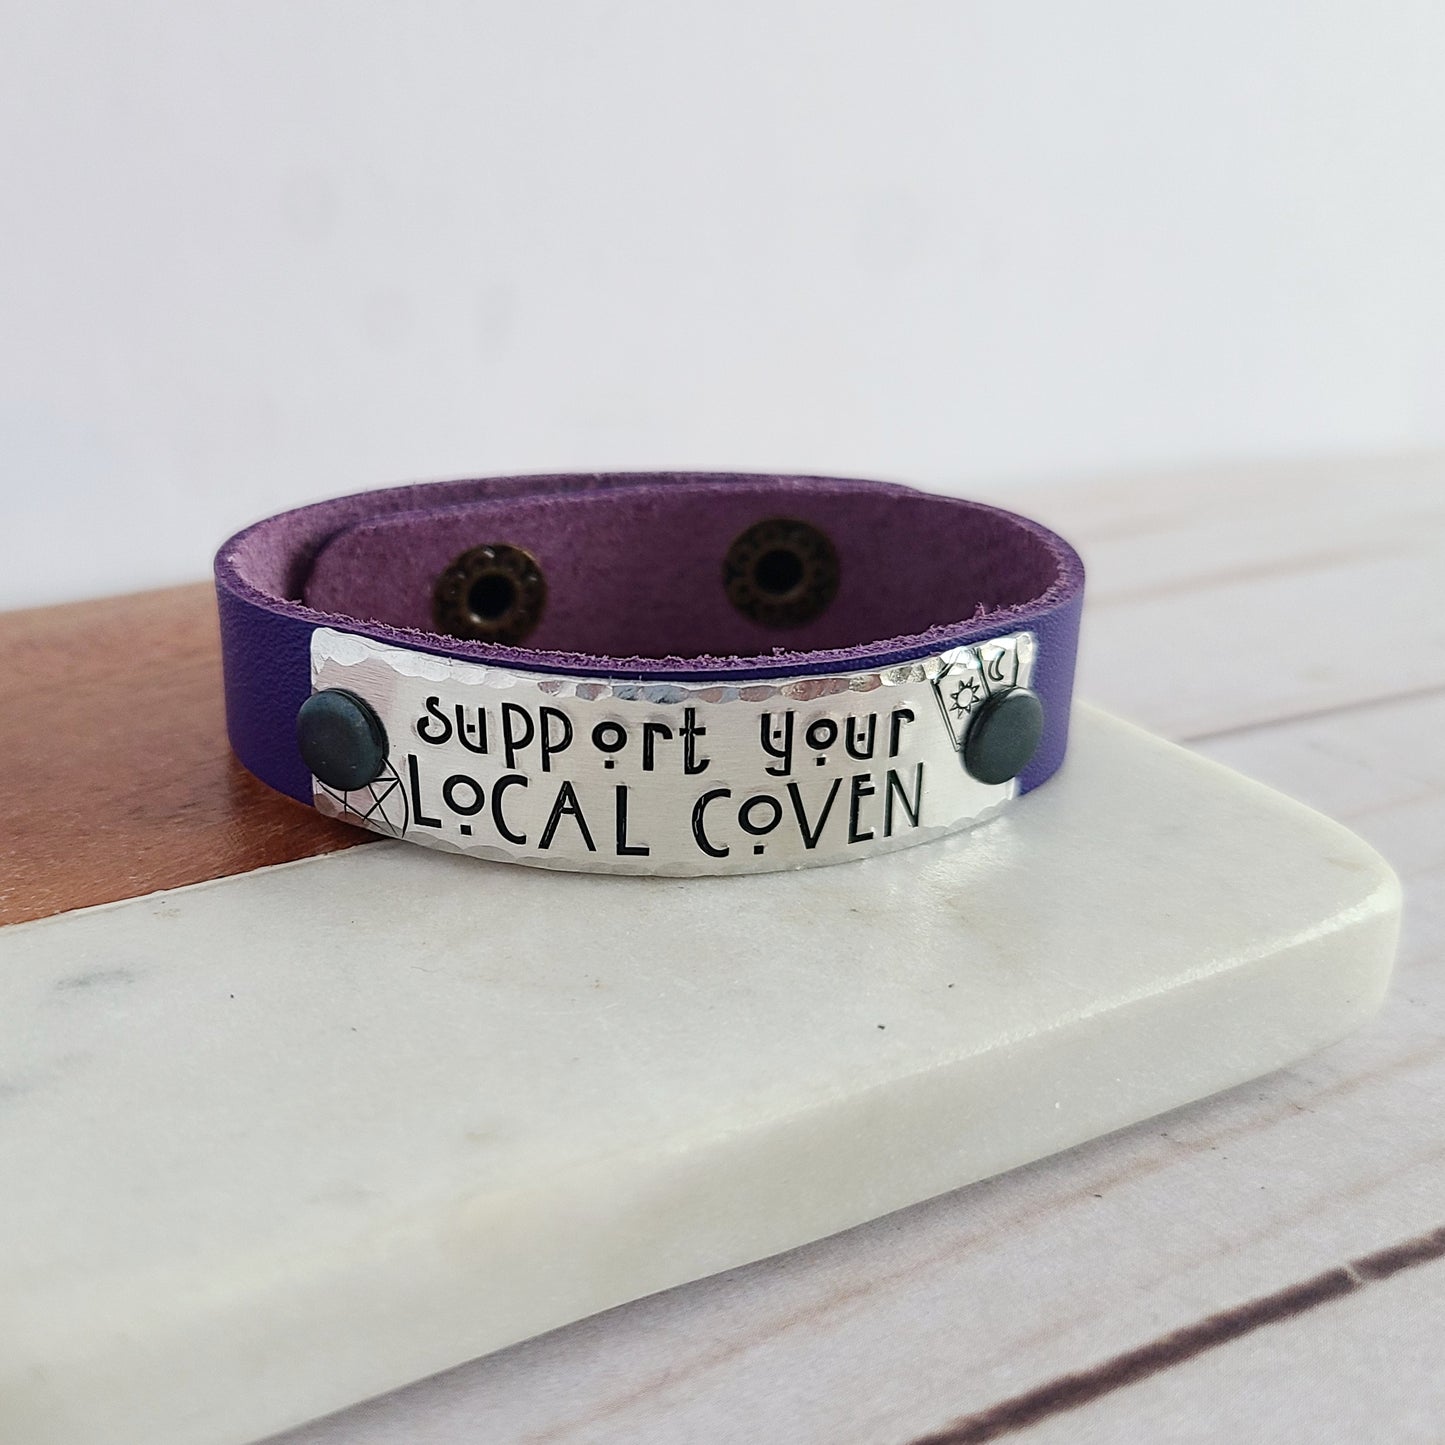 Support Your Local Coven Leather Cuff Bracelet - Witchy Woman Jewelry - Choose Your Color Leather